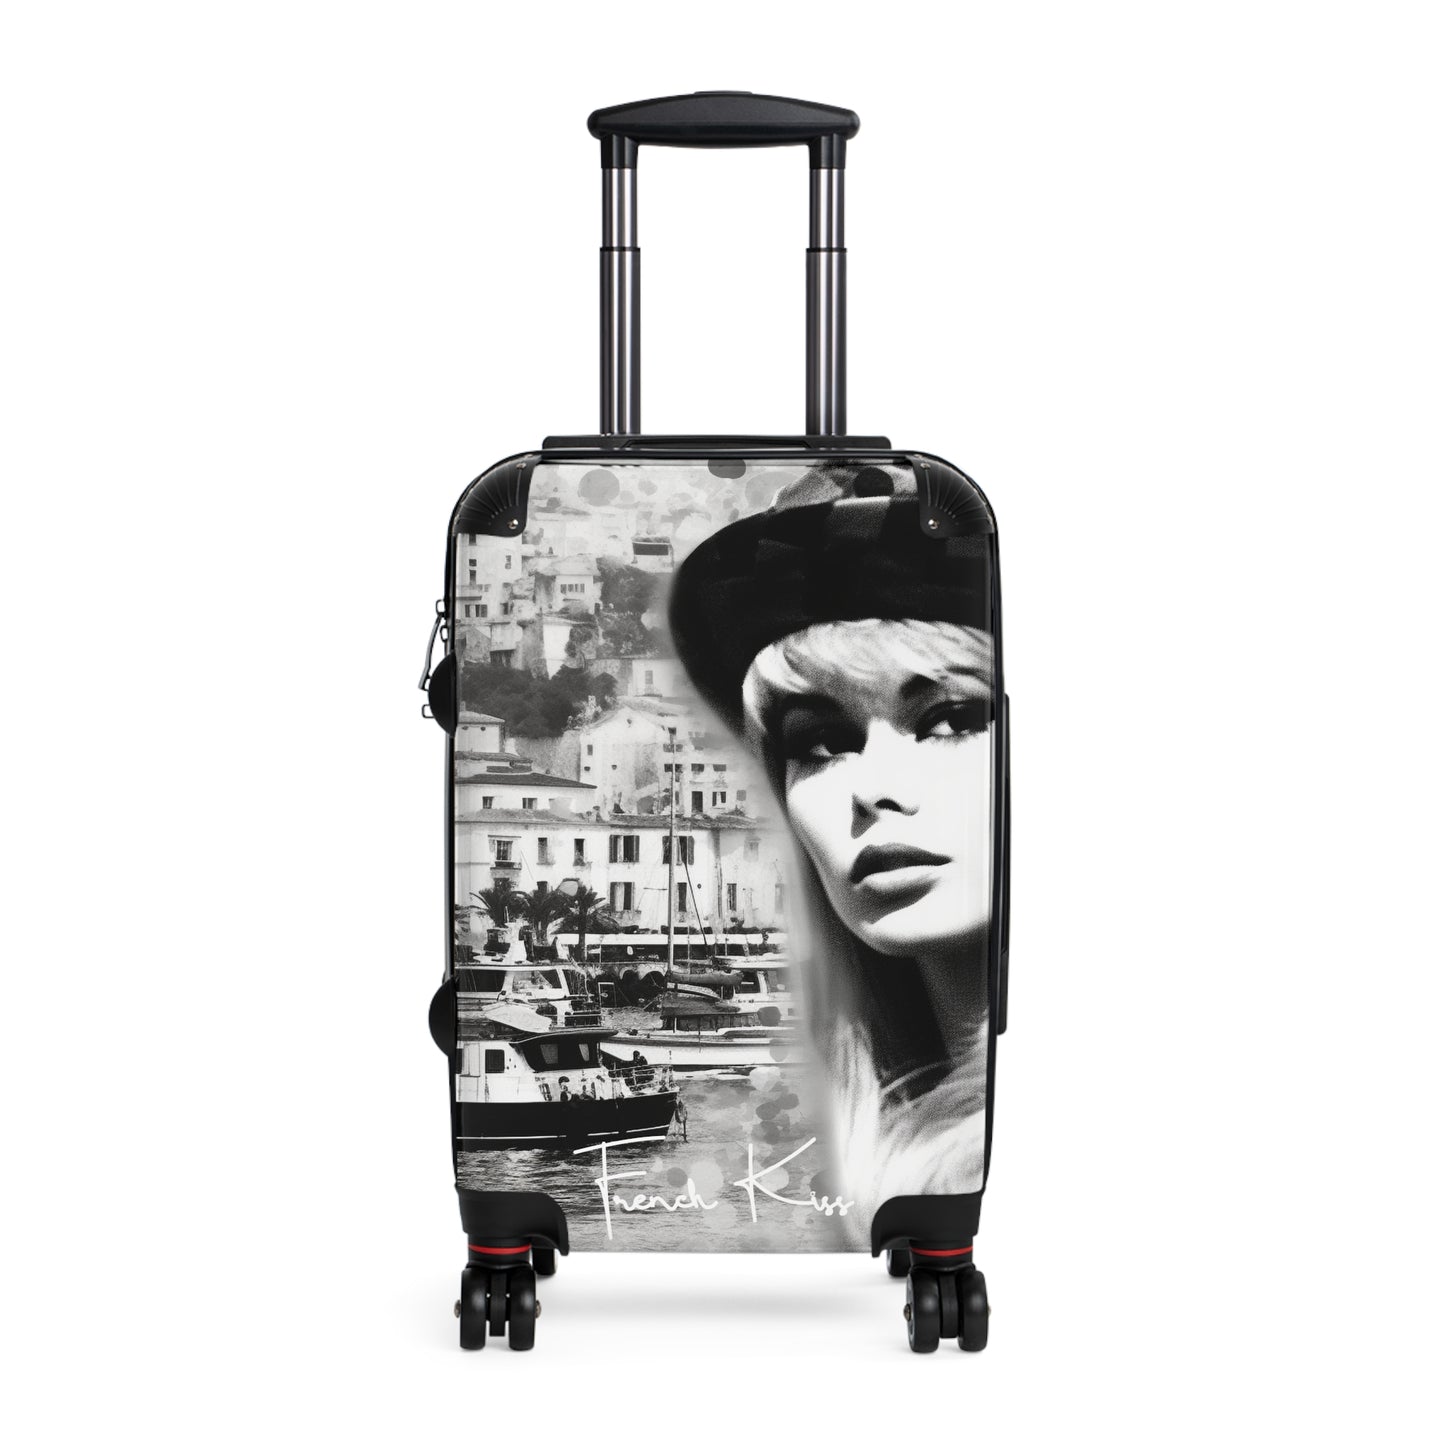 MADEMOISELLE French Kiss Pop Art, Travel, Suitcase, Fashion Couture, Pop Art, Style, Function, Jetset, Bag